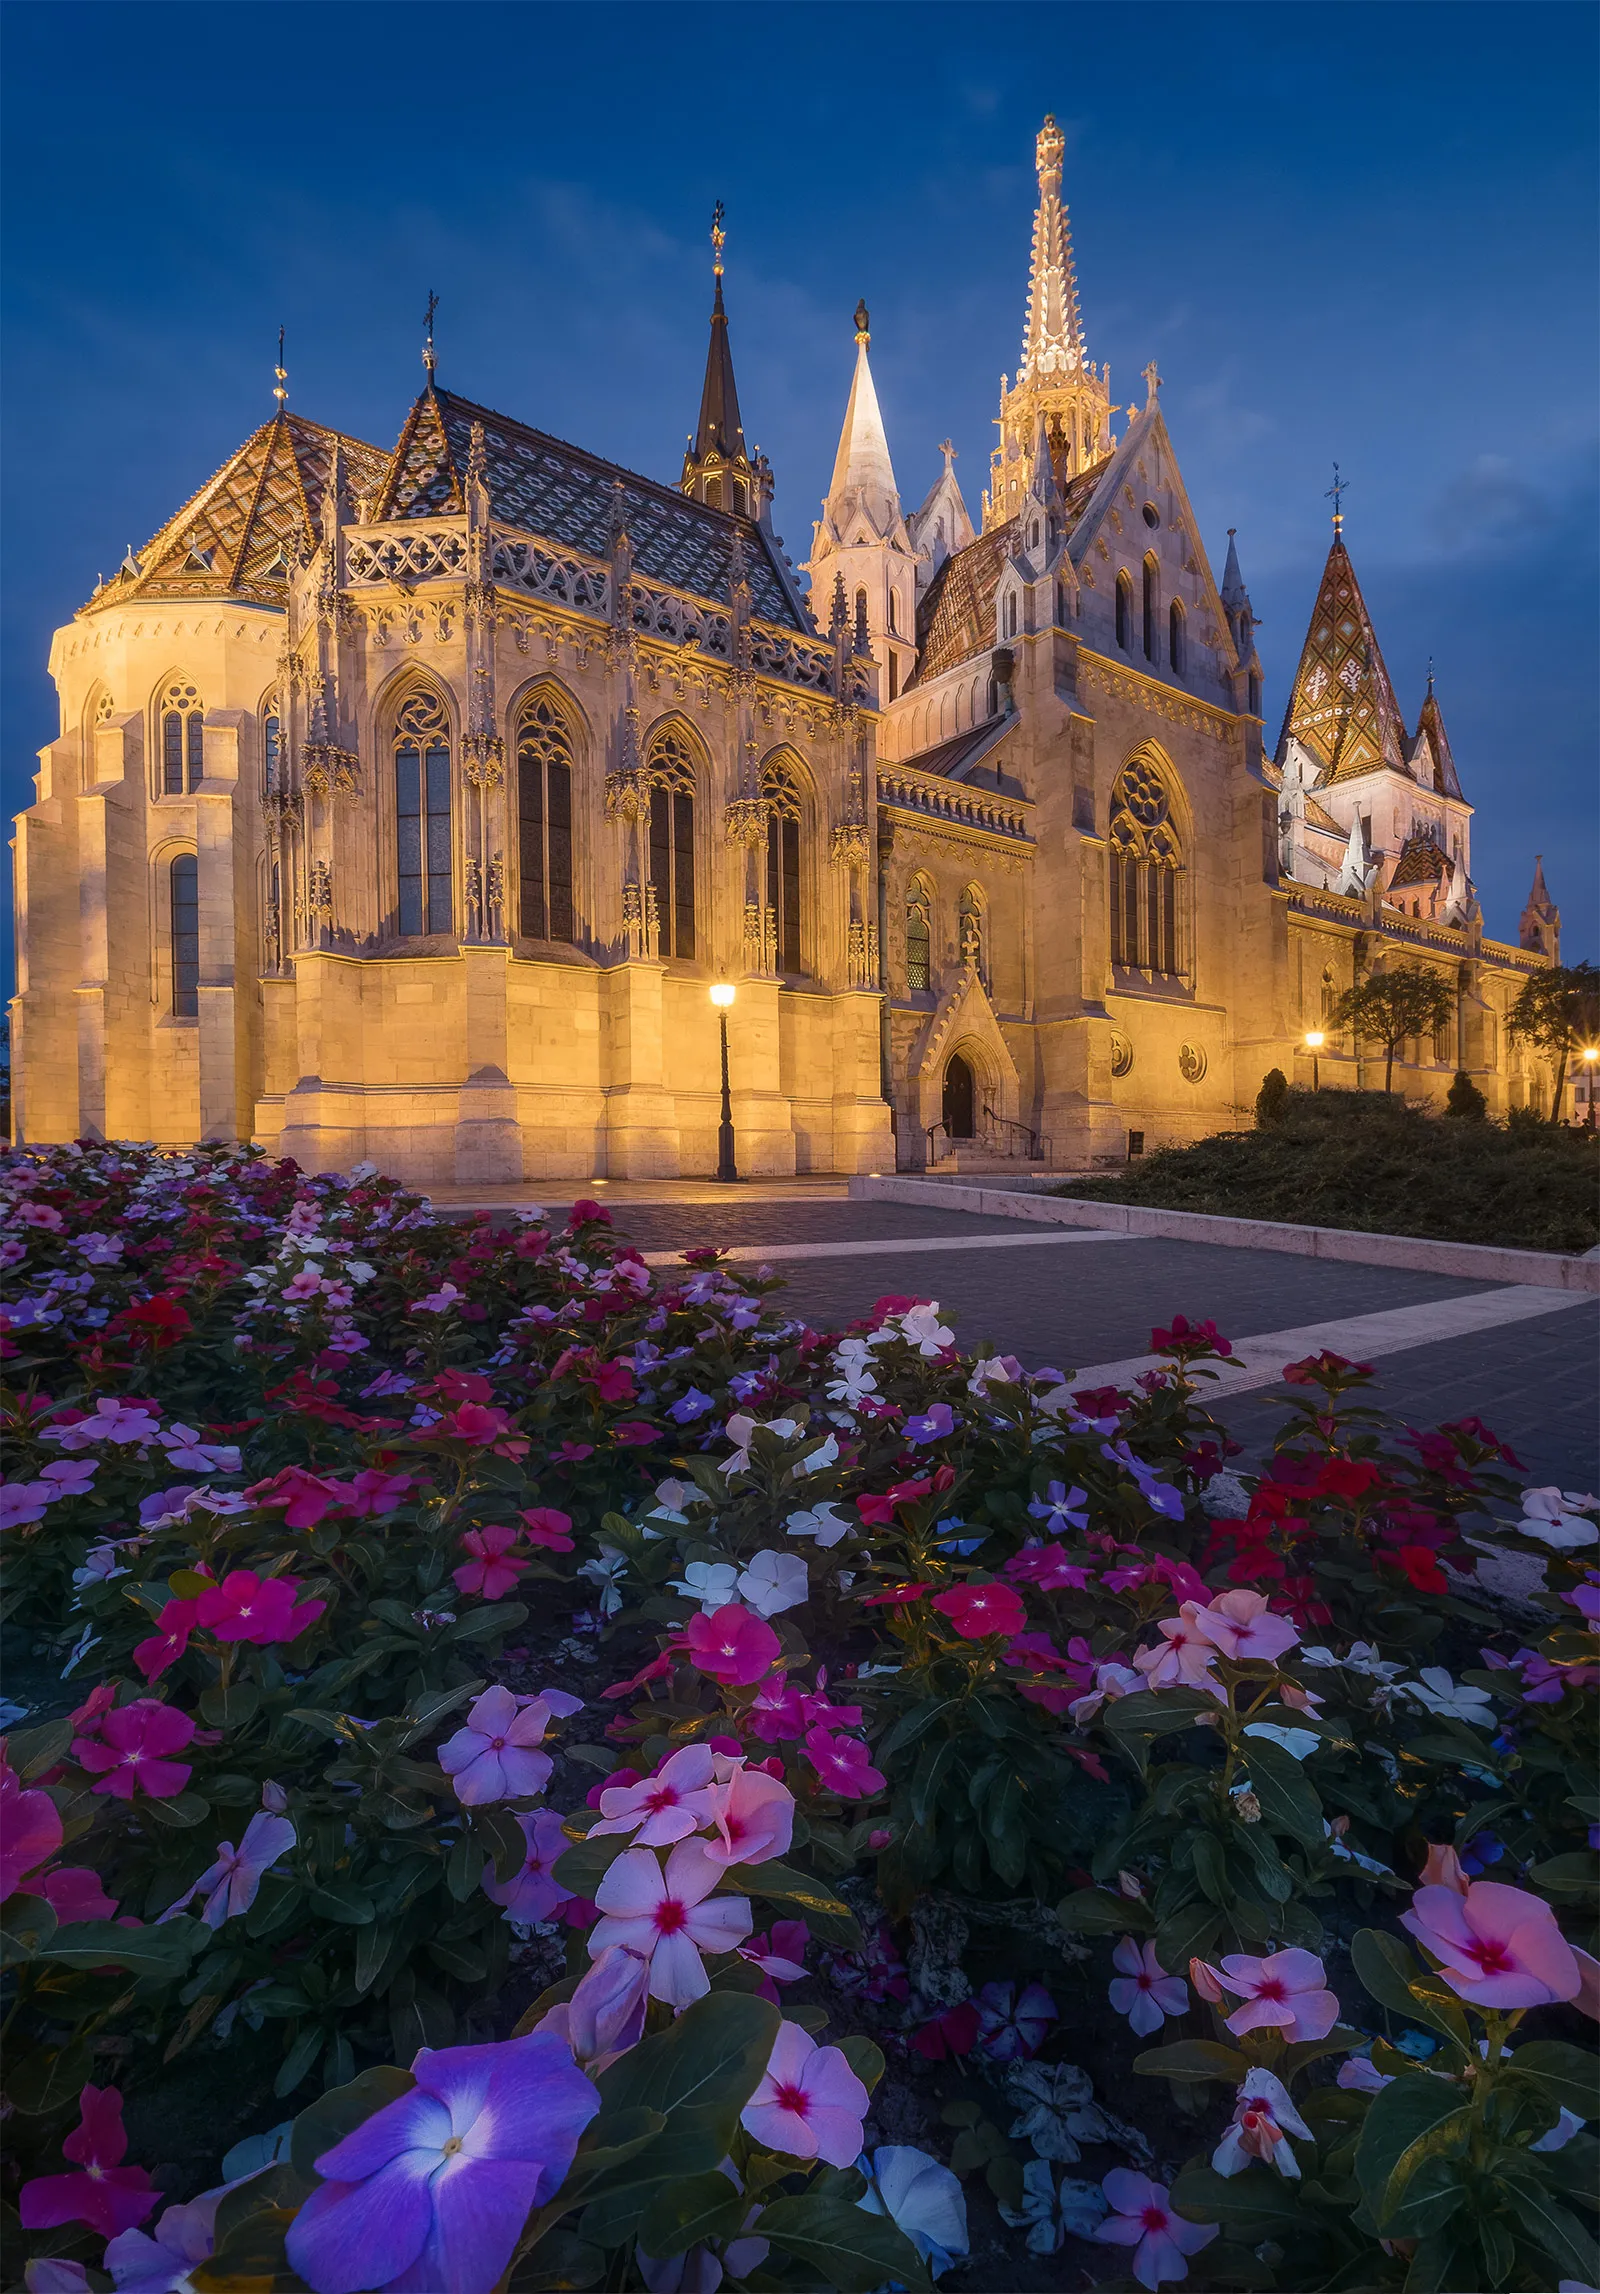 Blue hour photo of Matthias Church, located in the Buda castle in Budapest, Hungary